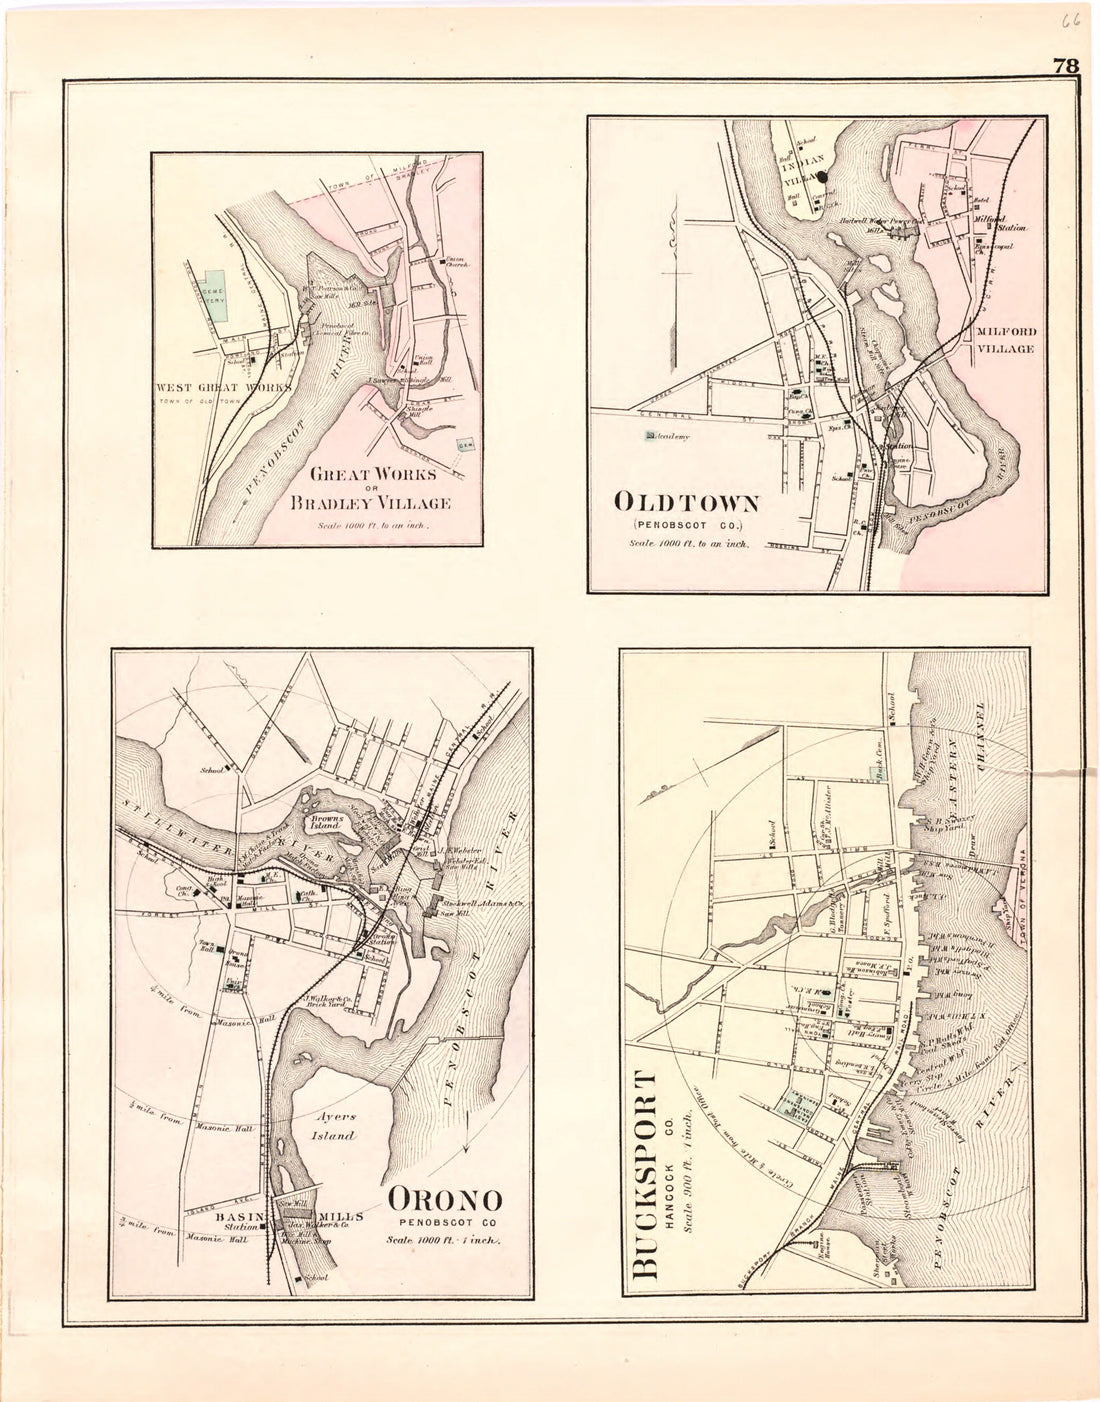 This hand drawn illustration (map) of Great Works Or Bradley Village; Oldtown; Orono; Bucksport from Colby&